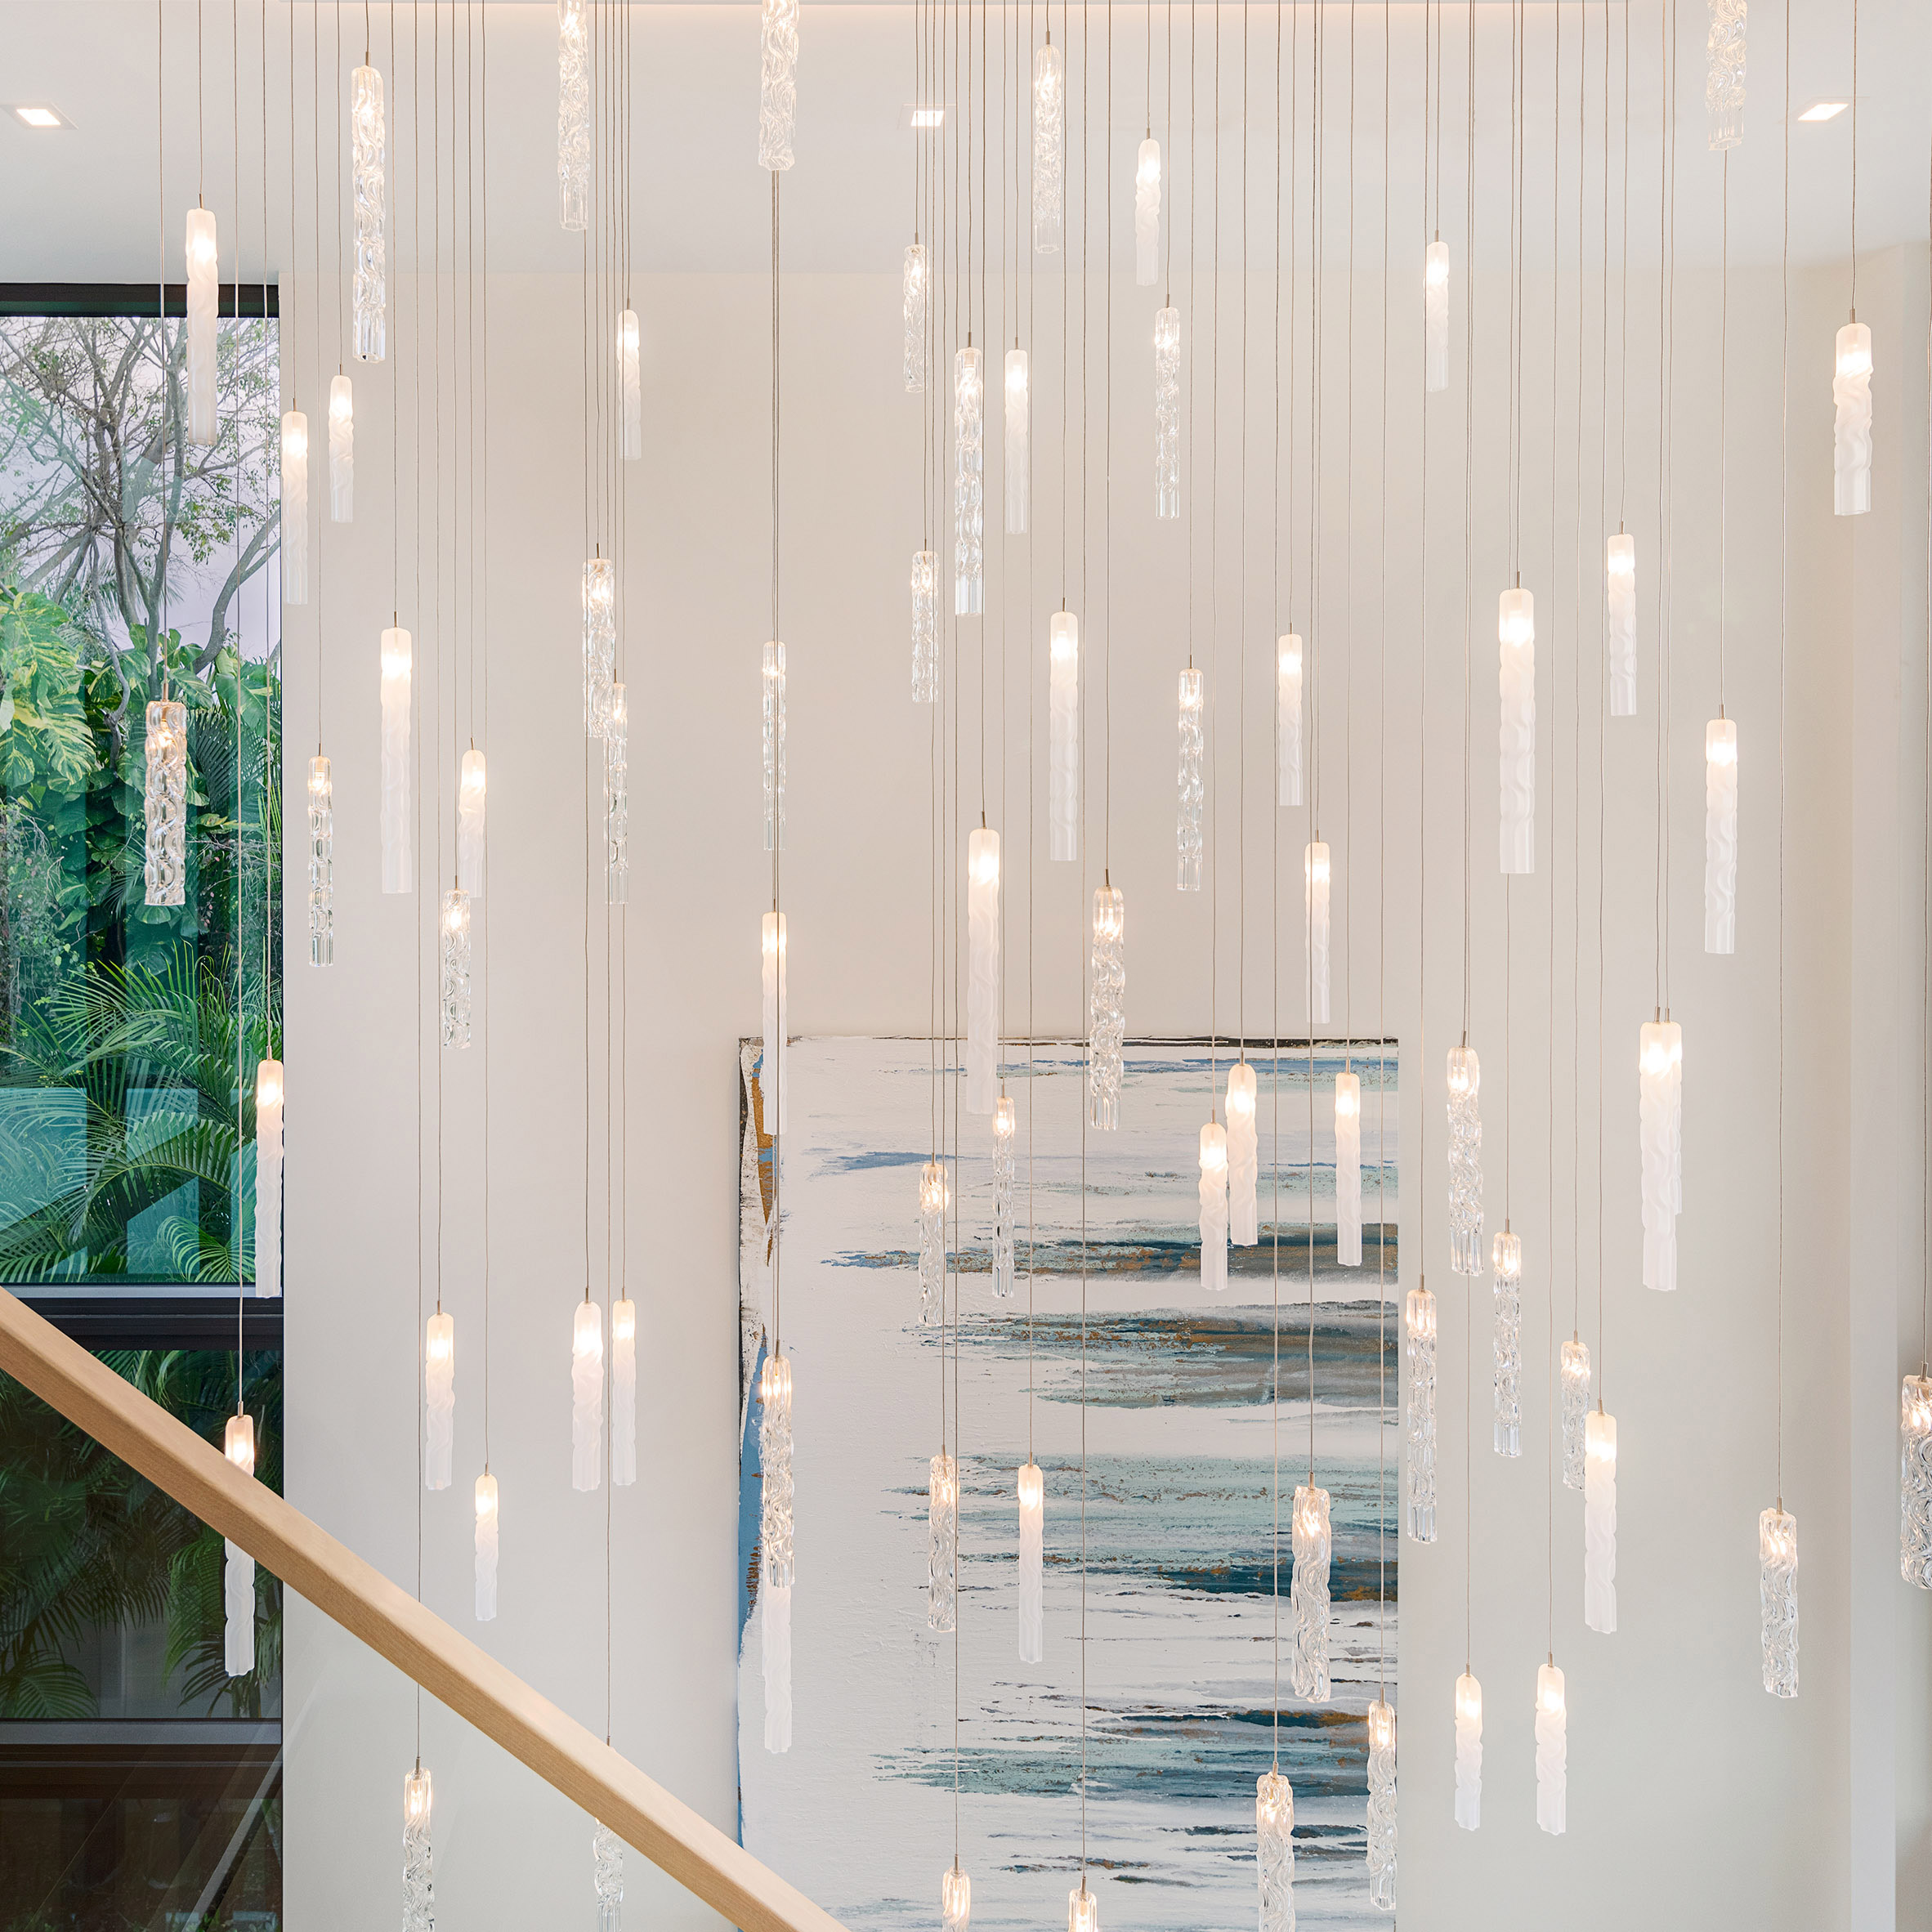 A constellation of Twist pendant lights by Dedar hung in a staircase